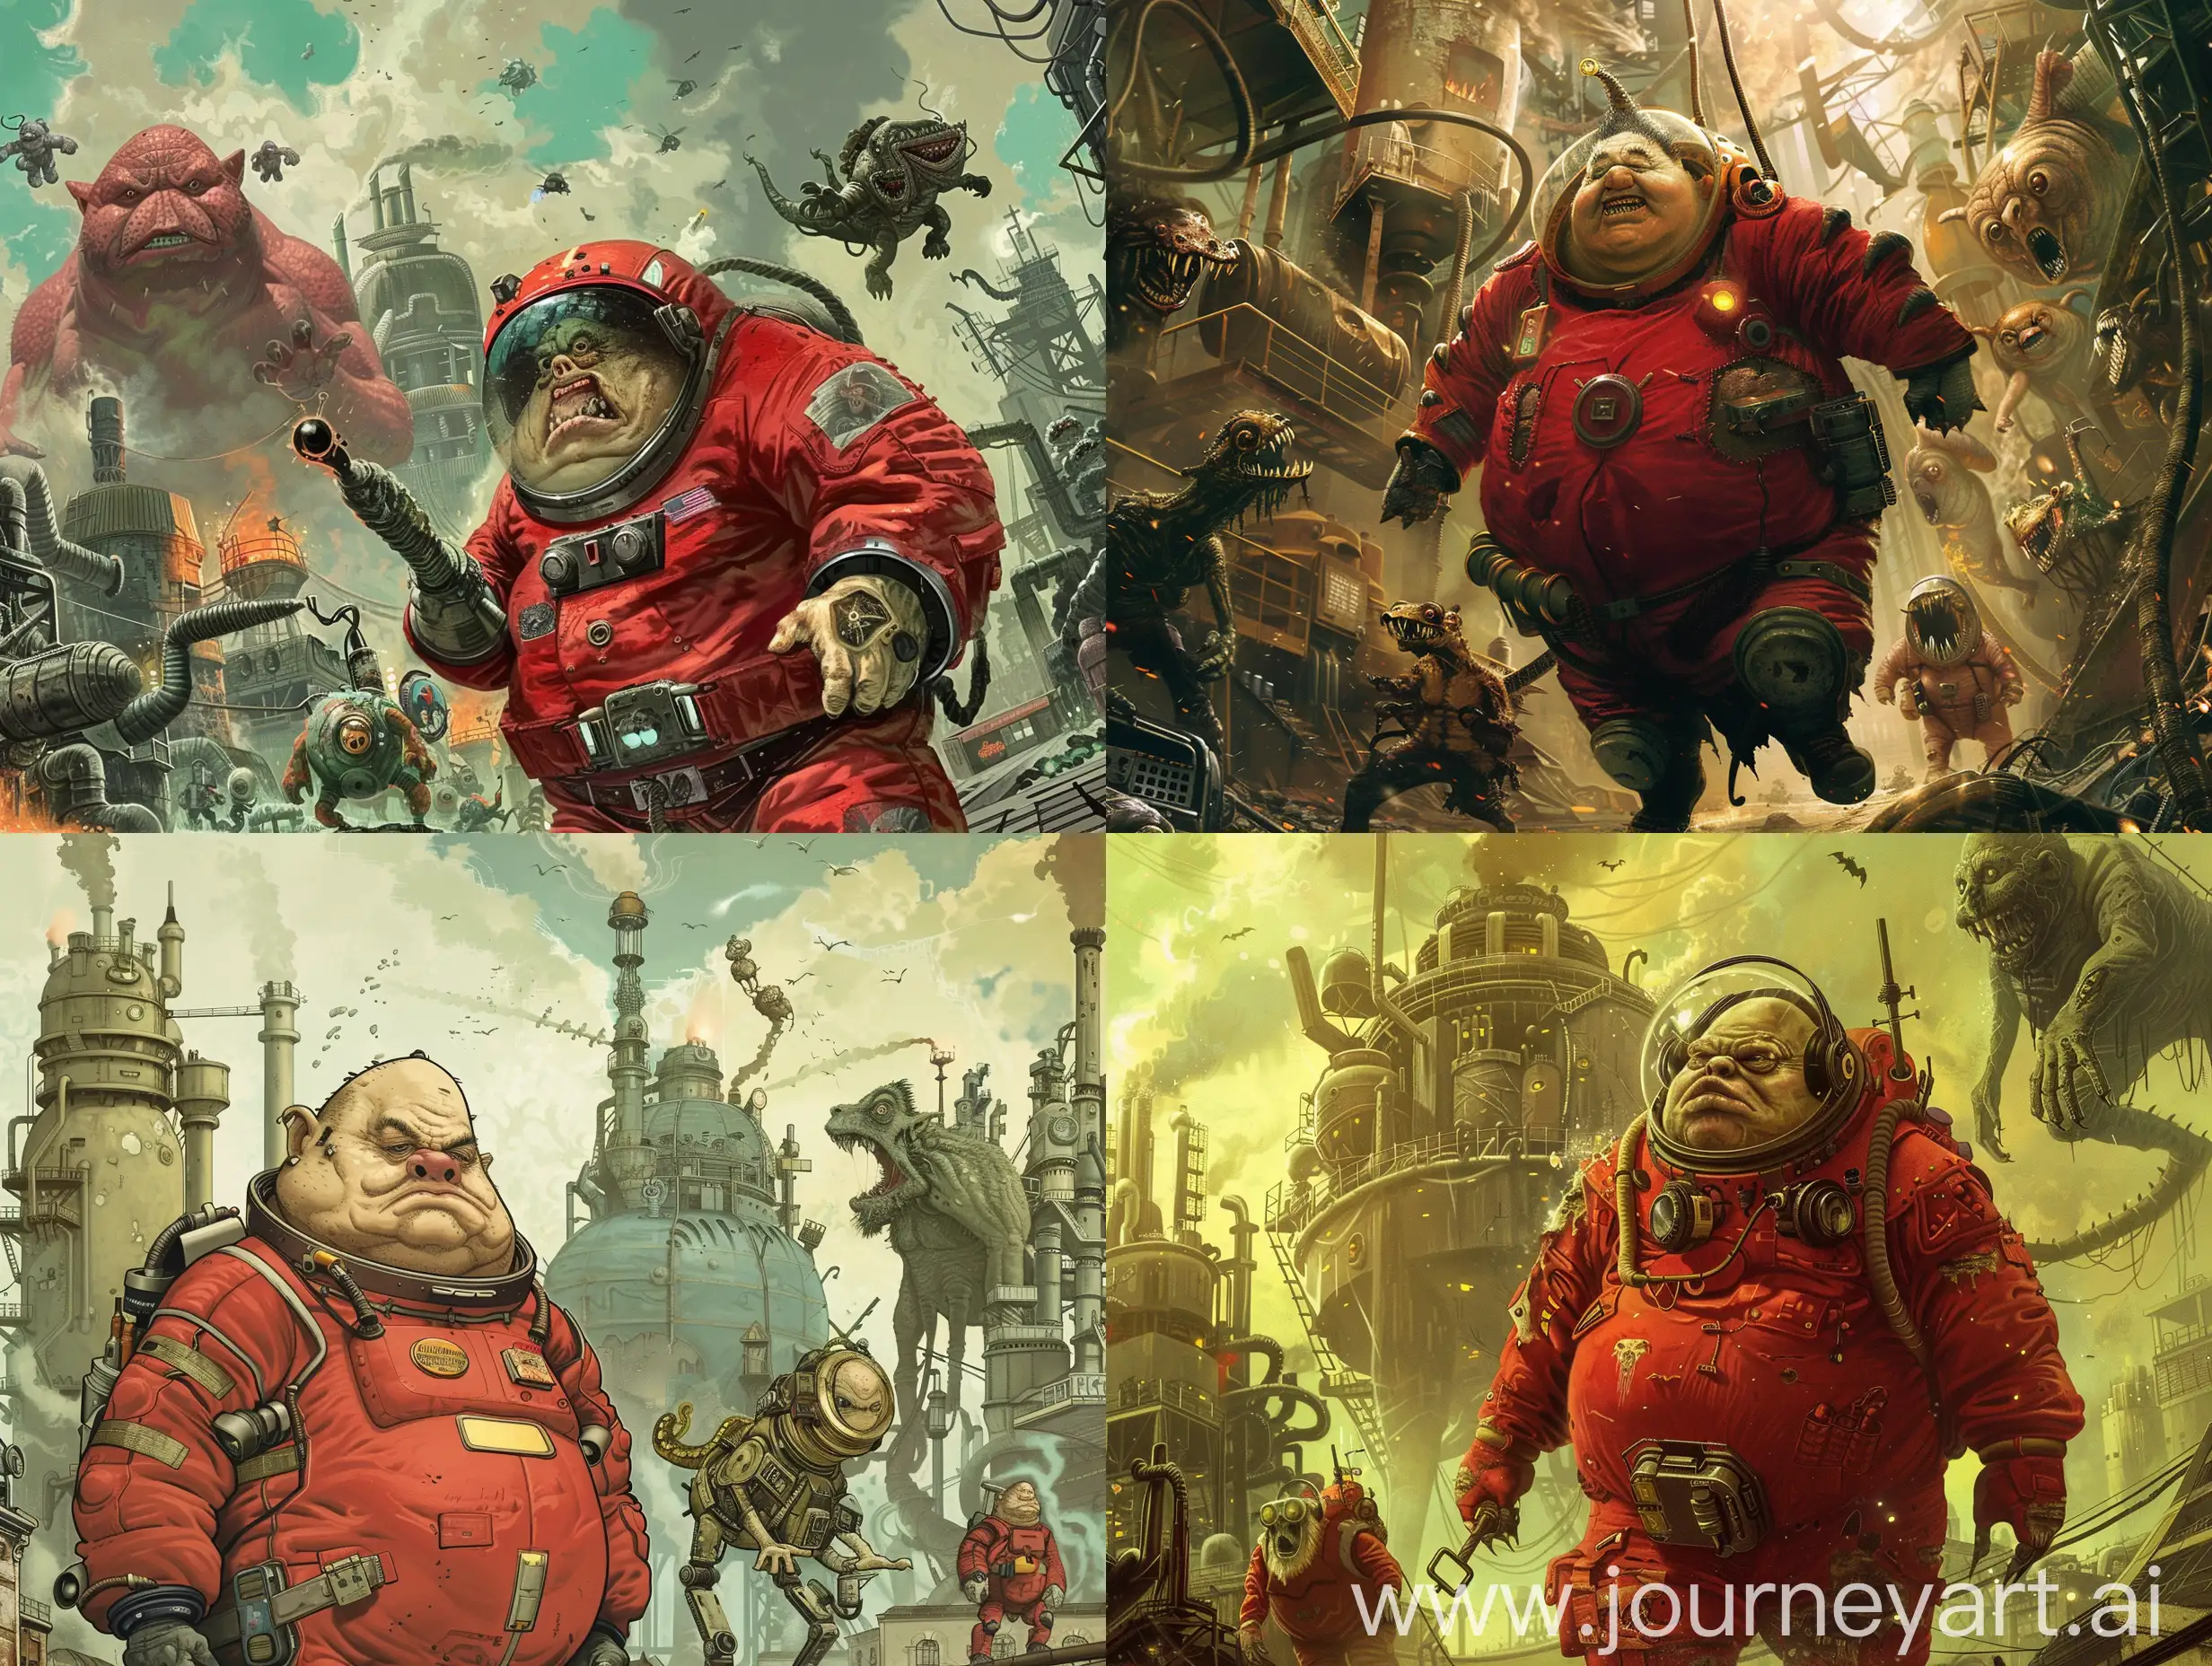 Rotund-Astronaut-in-Crimson-Spacesuit-Surrounded-by-Extraterrestrial-Monsters-and-Industrial-Facility